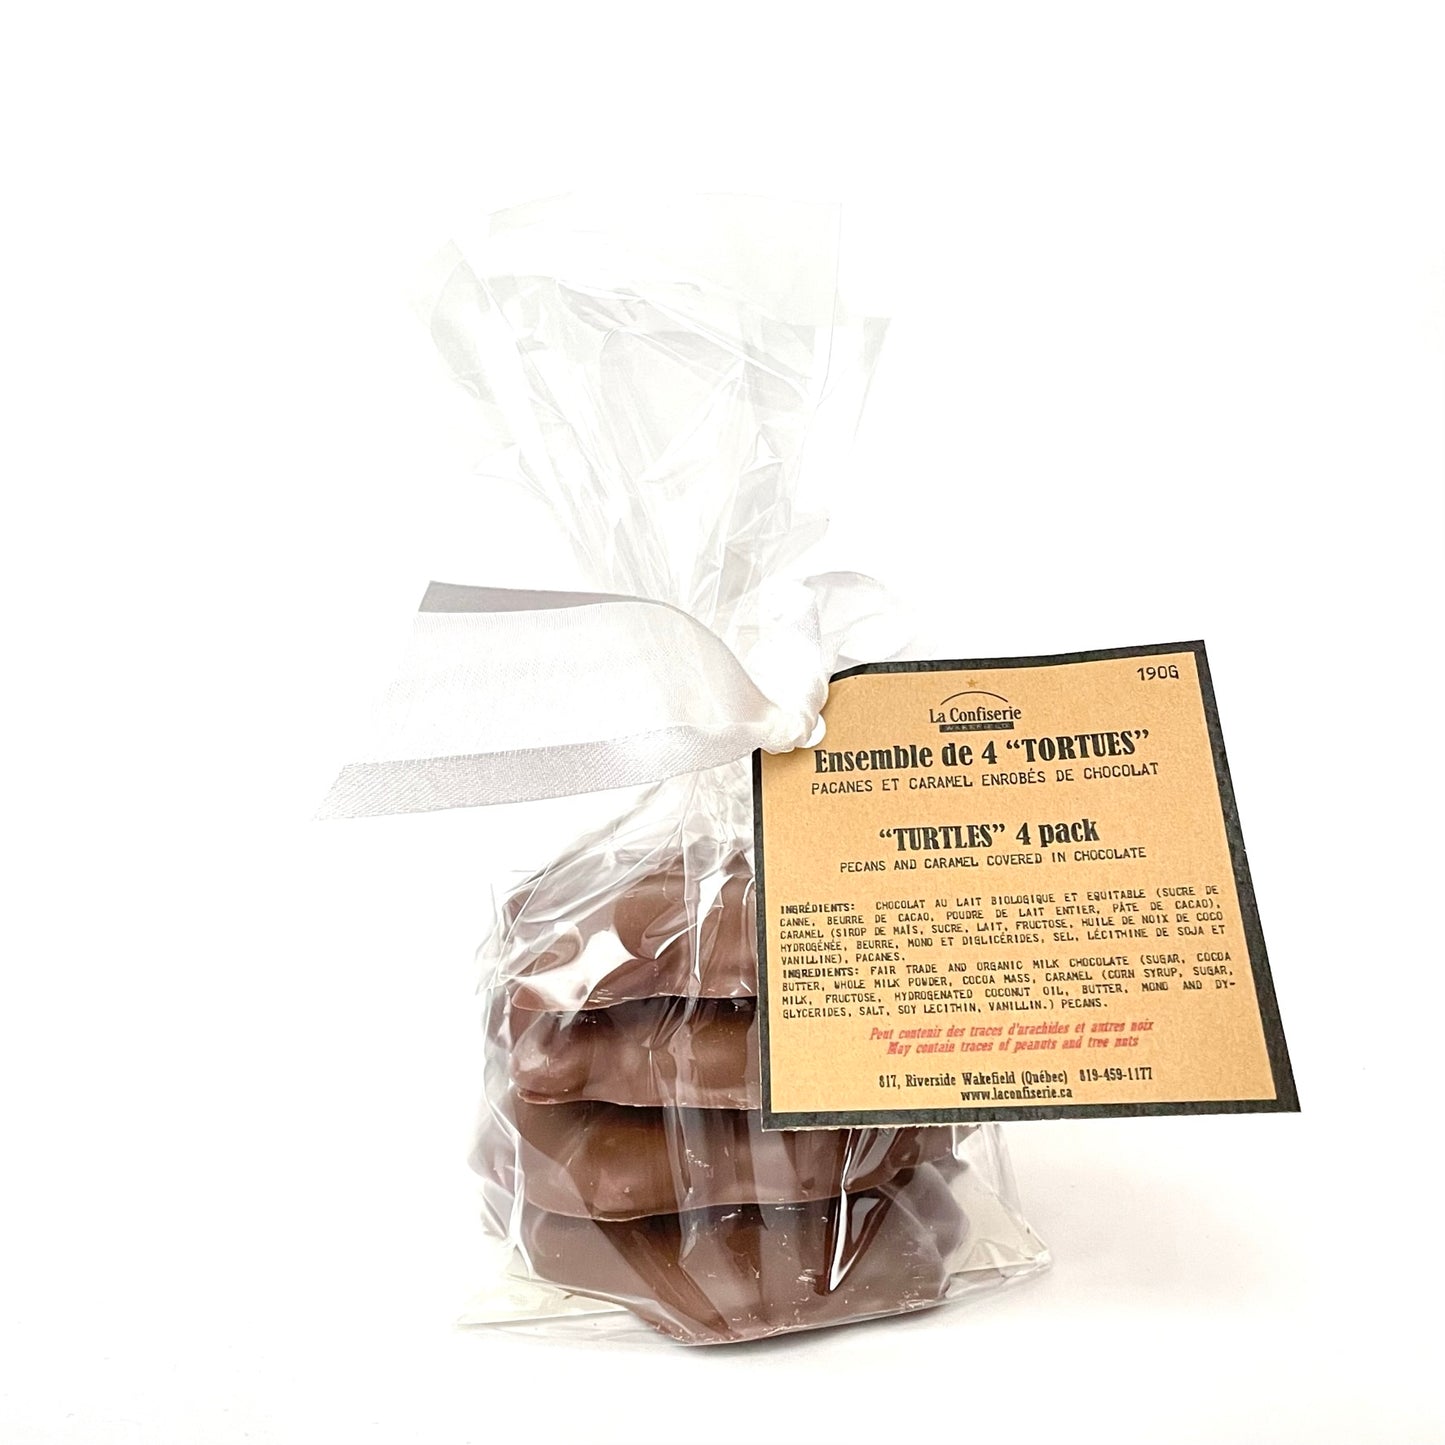 "Turtles" - Chocolate covered caramel and pecans